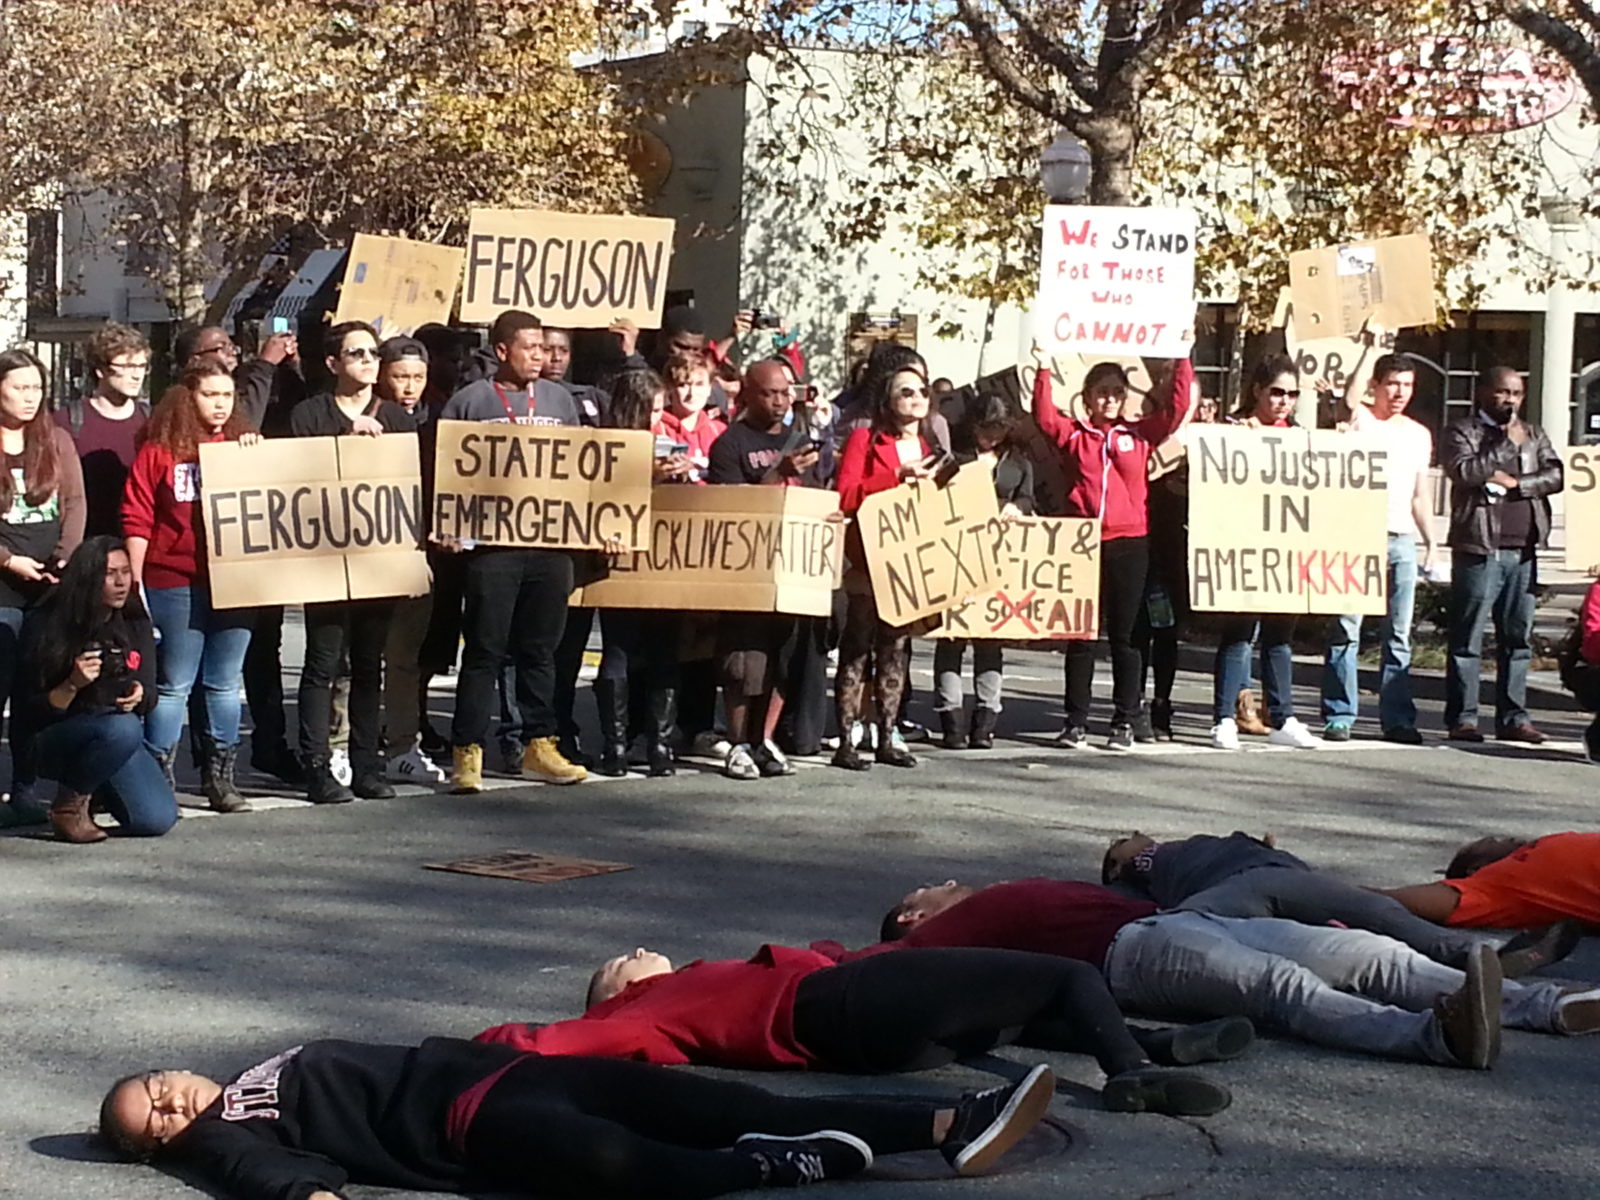 About 300 Stanford students converged on downtown Palo Alto today and briefly shut down University Avenue with a die-in, to protest the unjust decision in Ferguson.